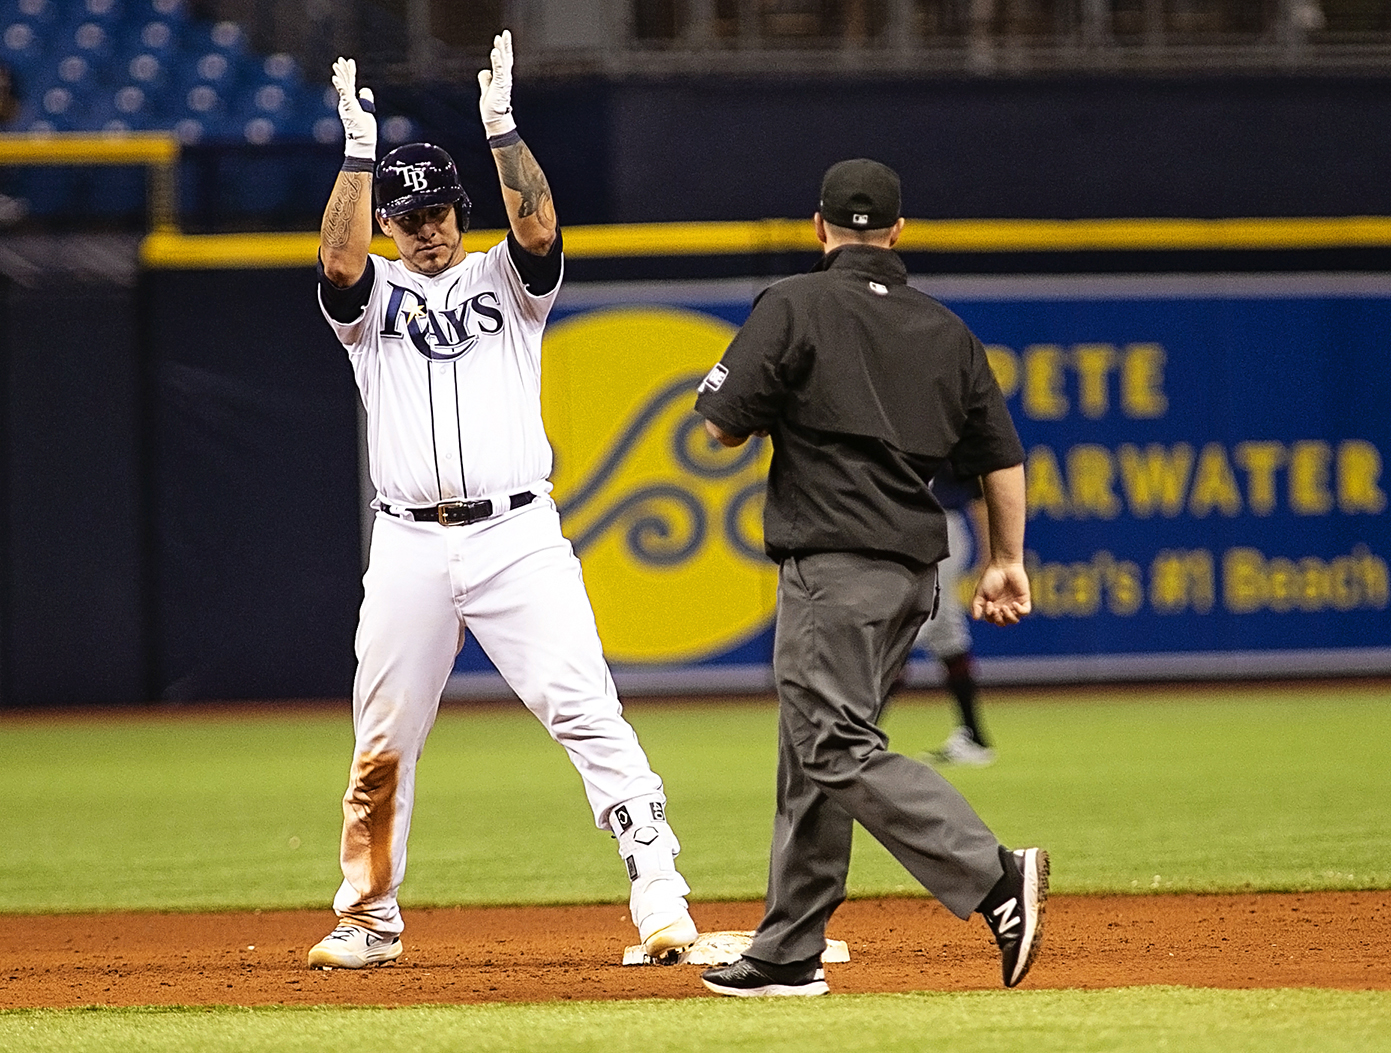 Ramos doubles in the 10th inning in Rays' comeback./CARMEN MANDATO